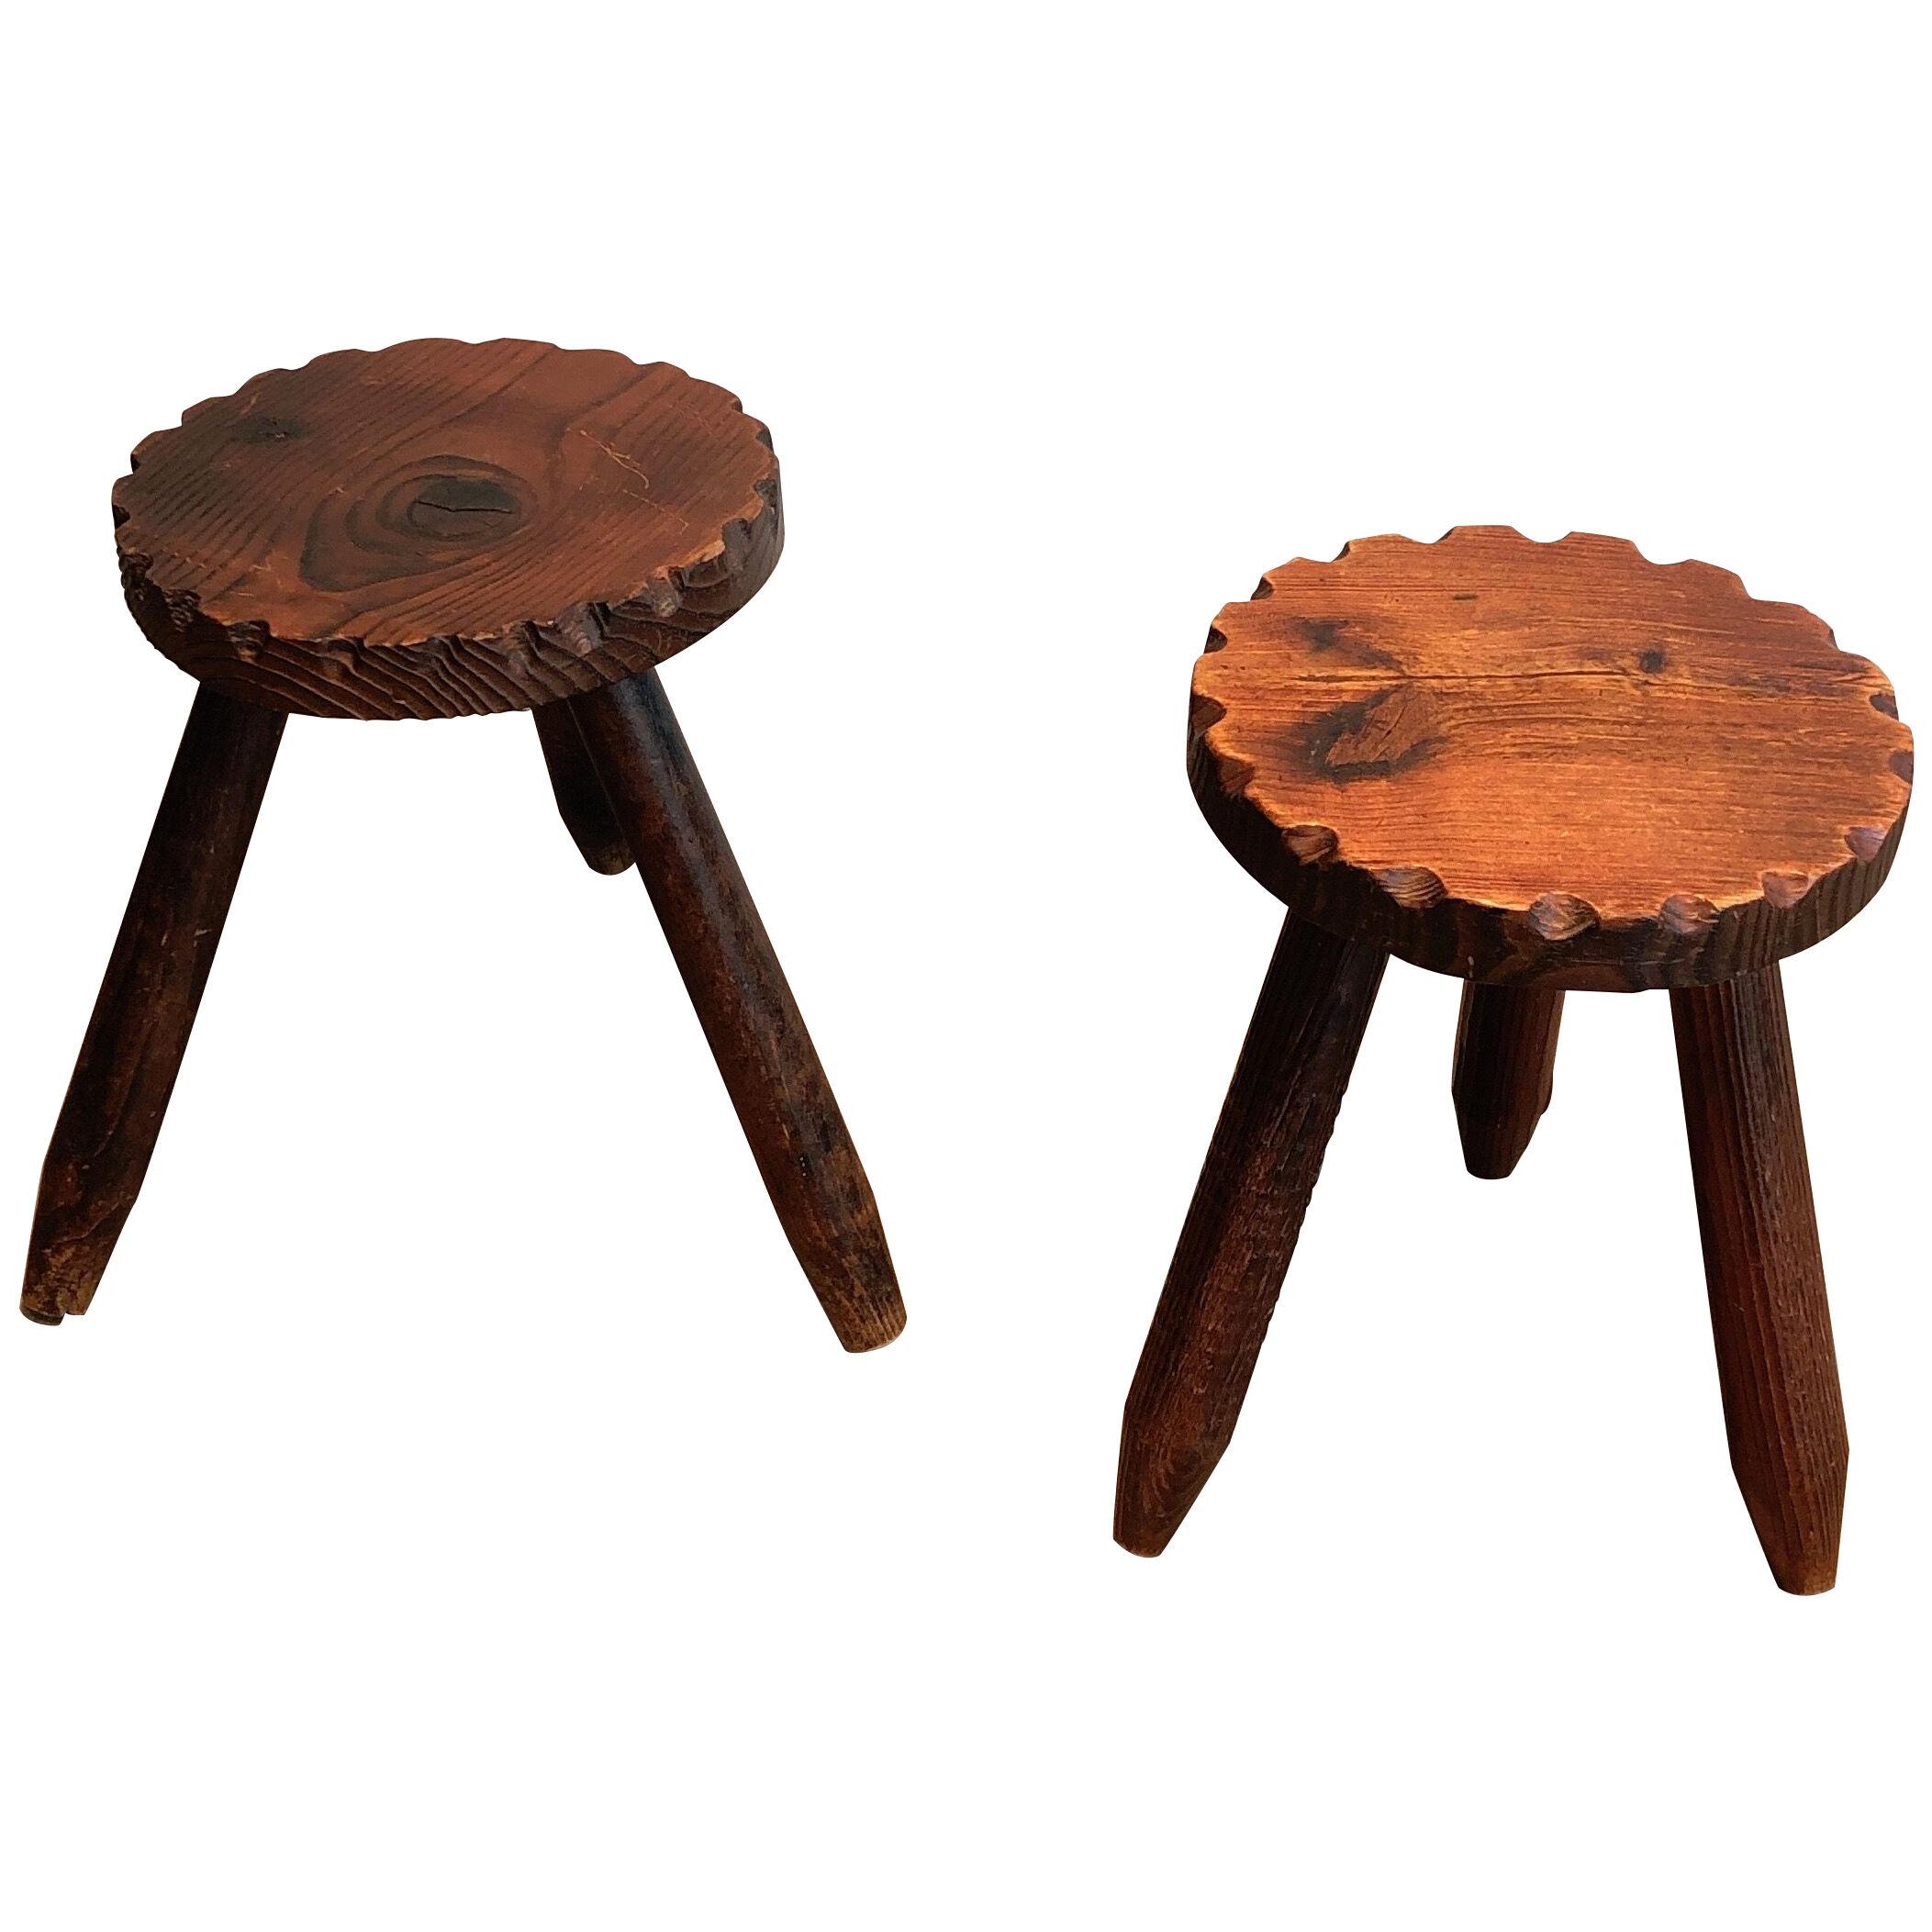 Pair of pine brutalist stools. French work. Circa 1950